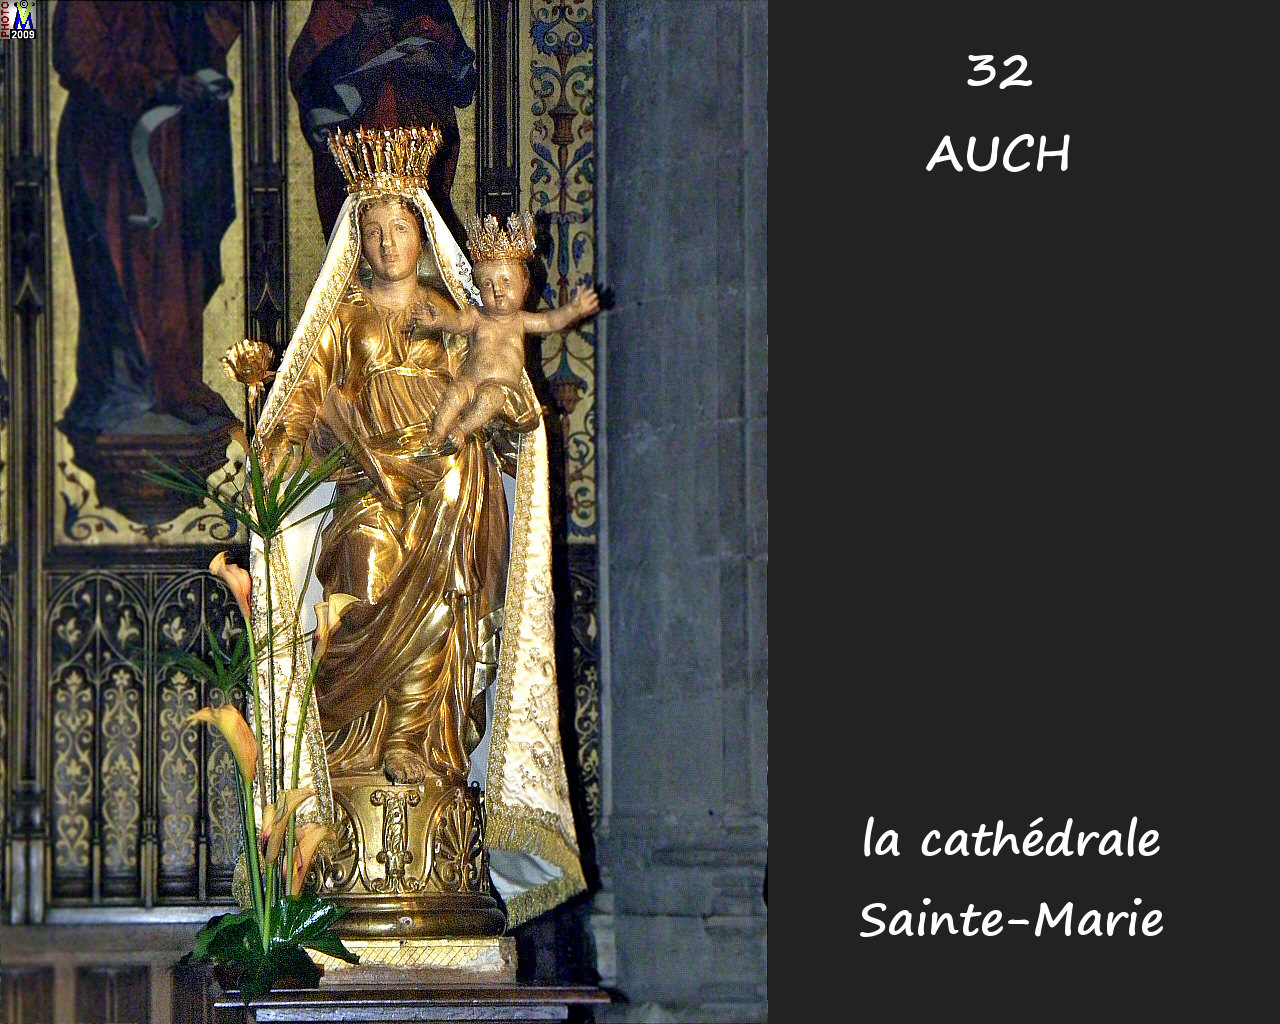 32AUCH_cathedrale_260.jpg